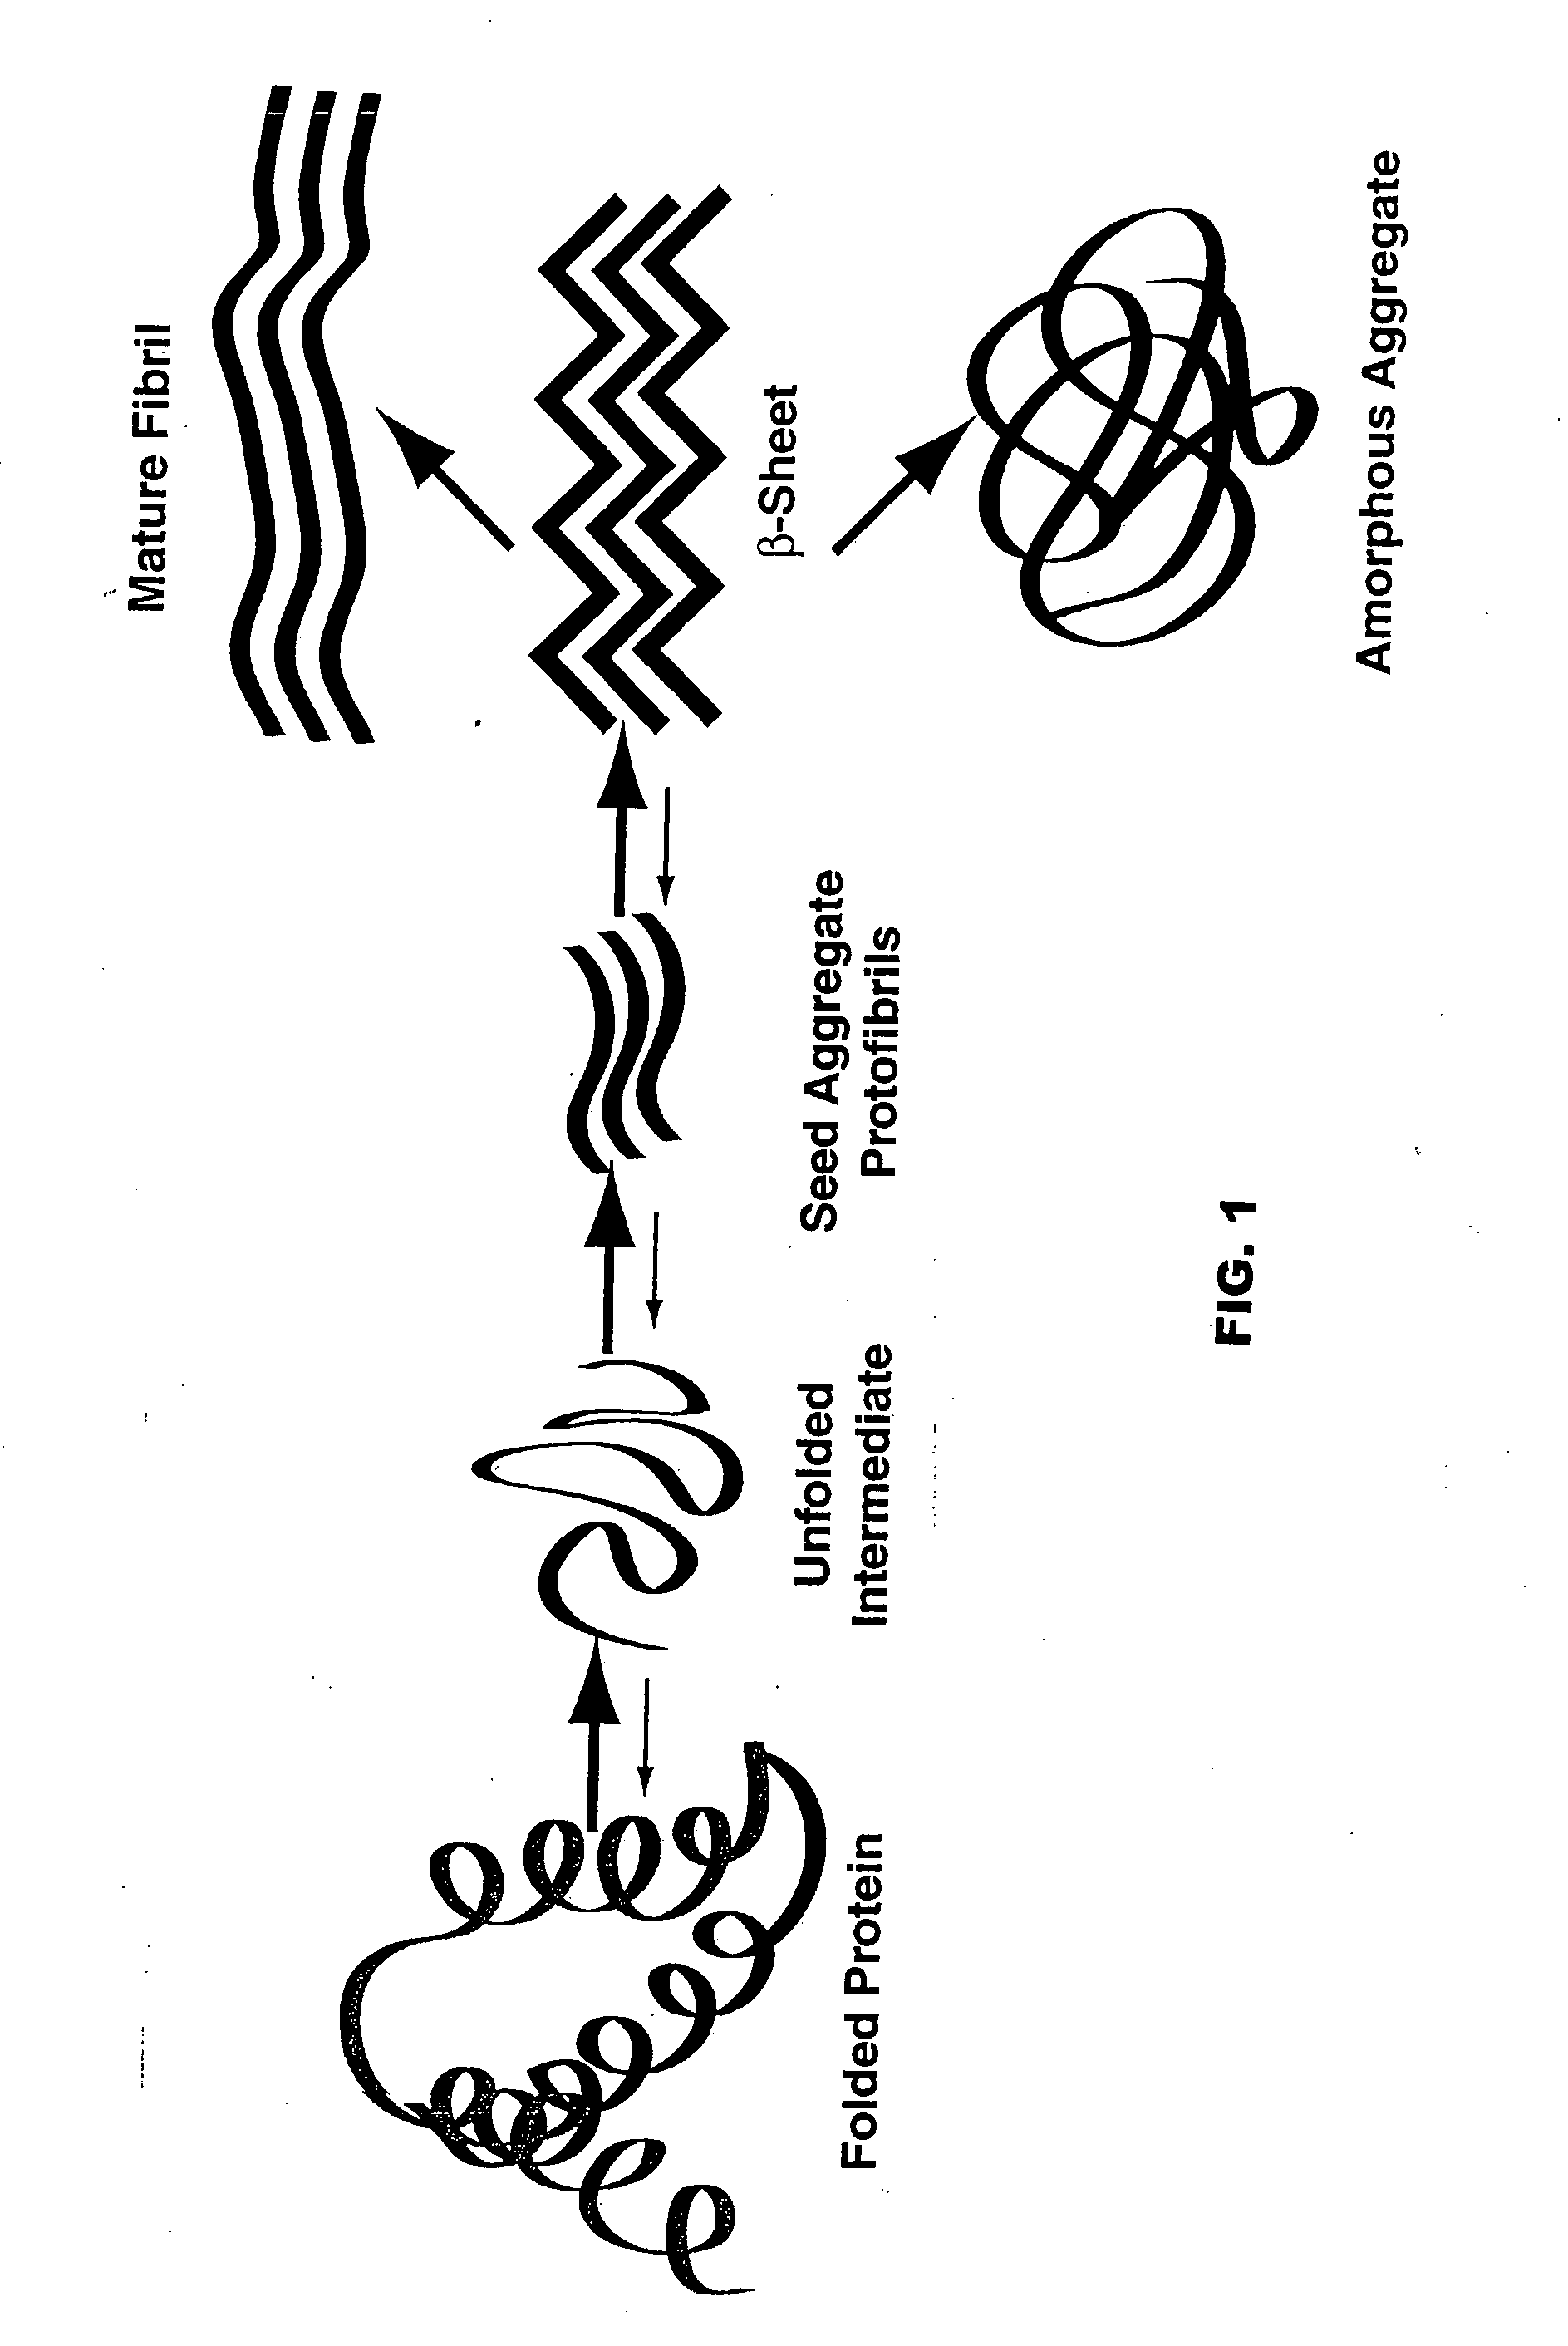 Neurodegenerative protein aggregation inhibition methods and compounds